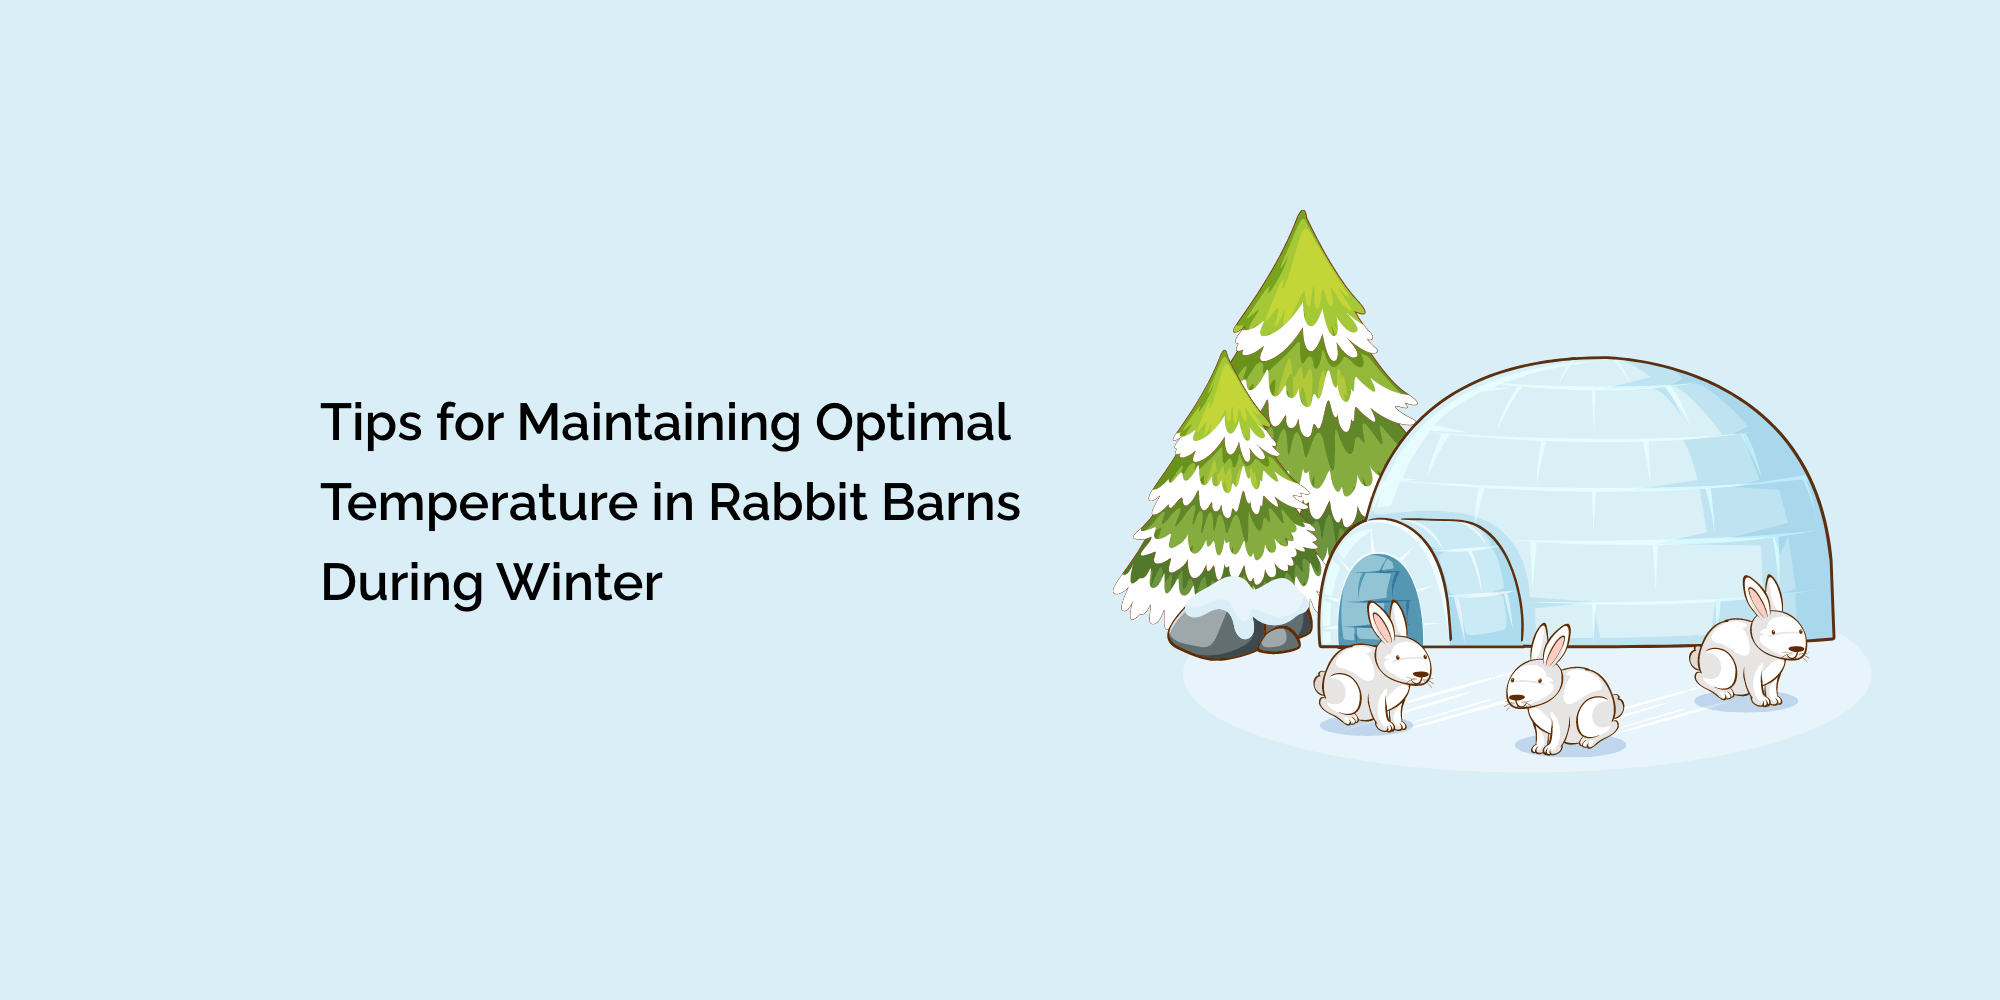 Tips for Maintaining Optimal Temperature in Rabbit Barns During Winter